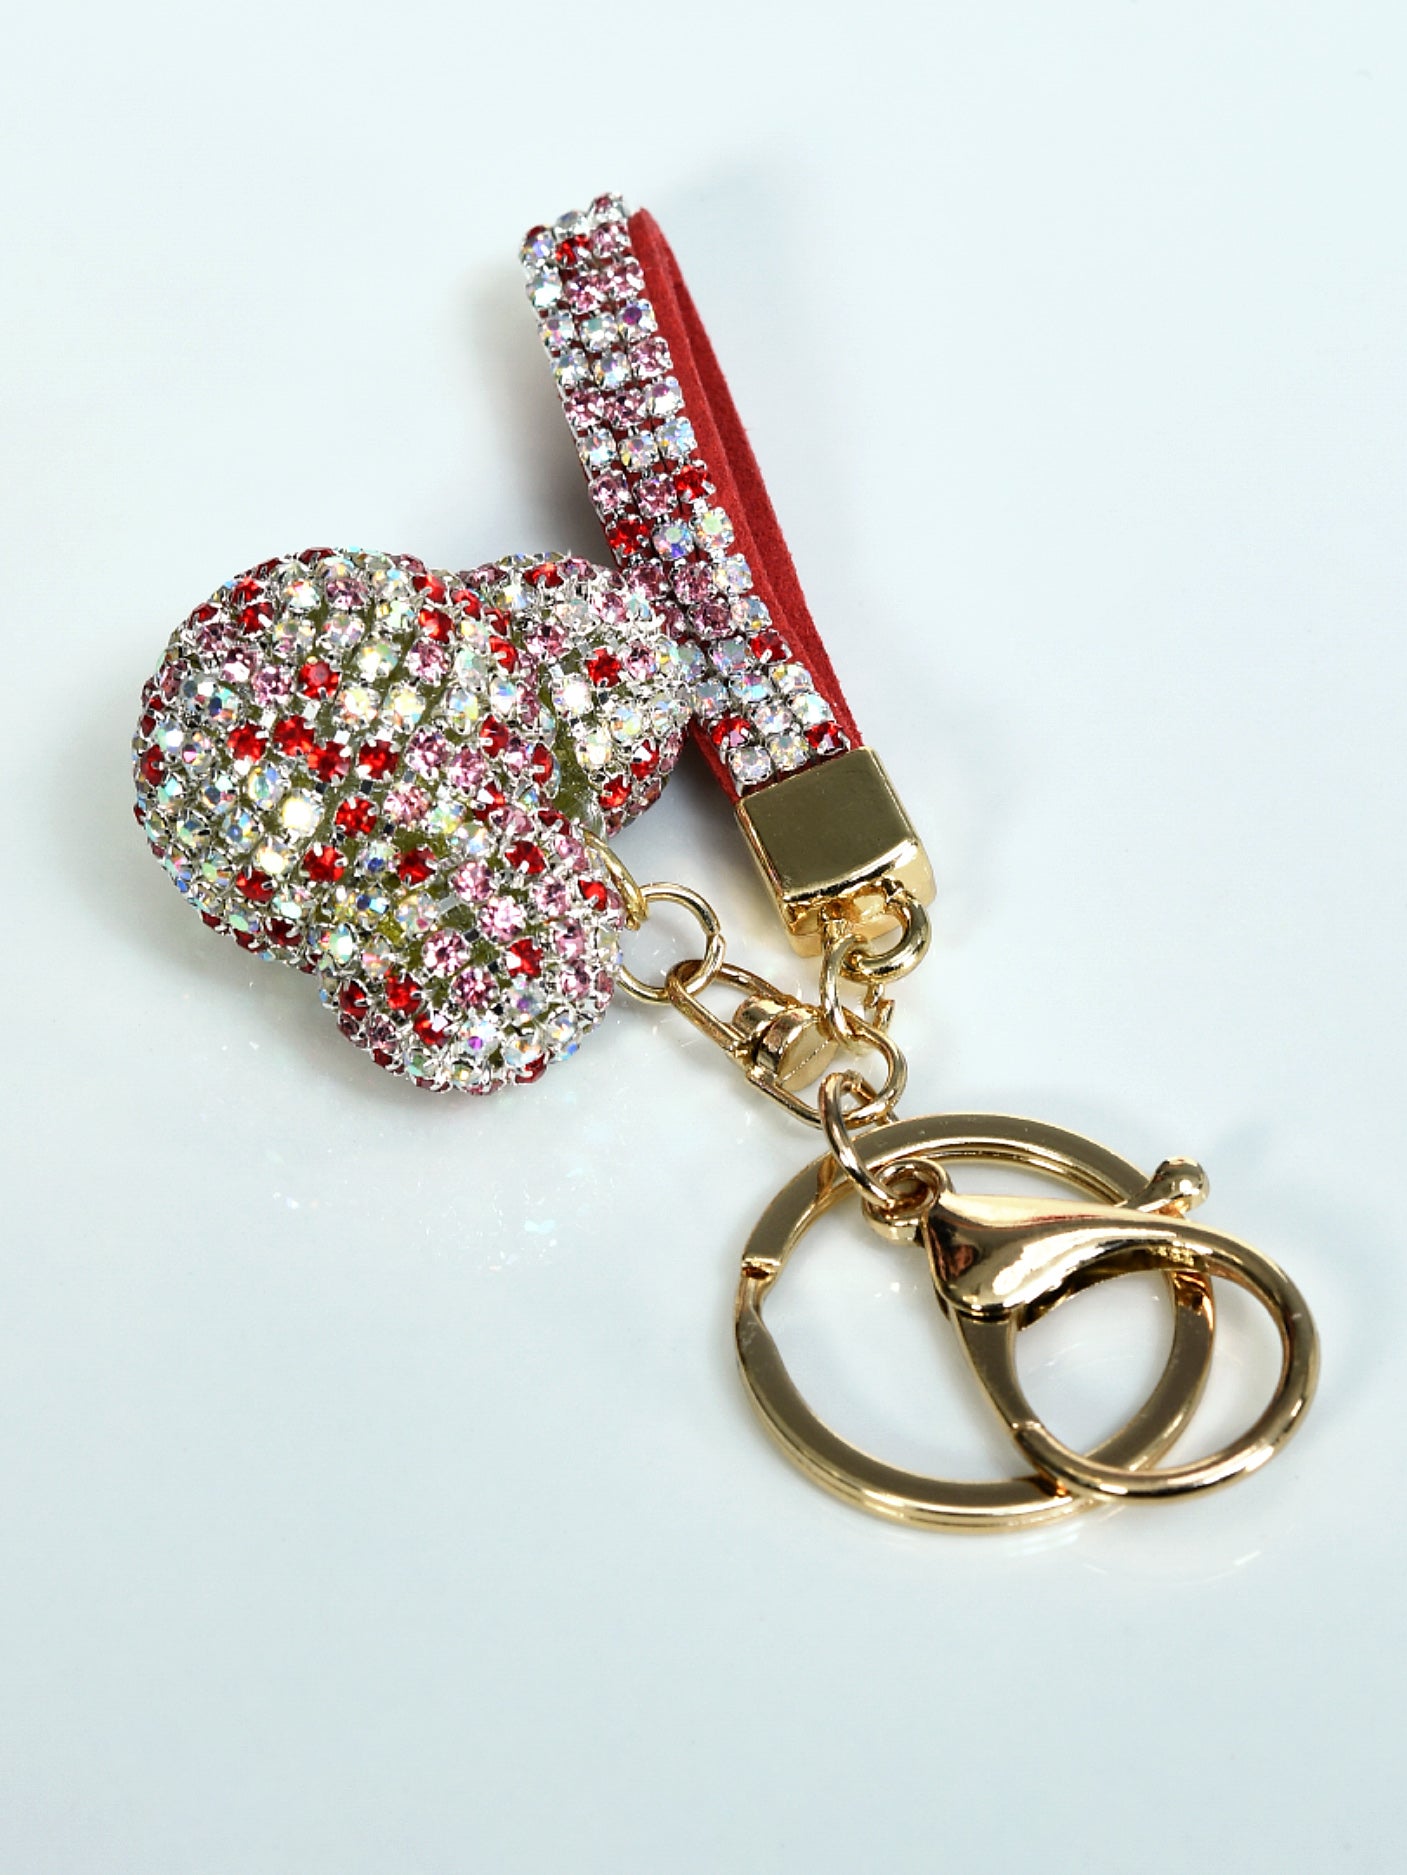 Mickey Mouse Key Chain